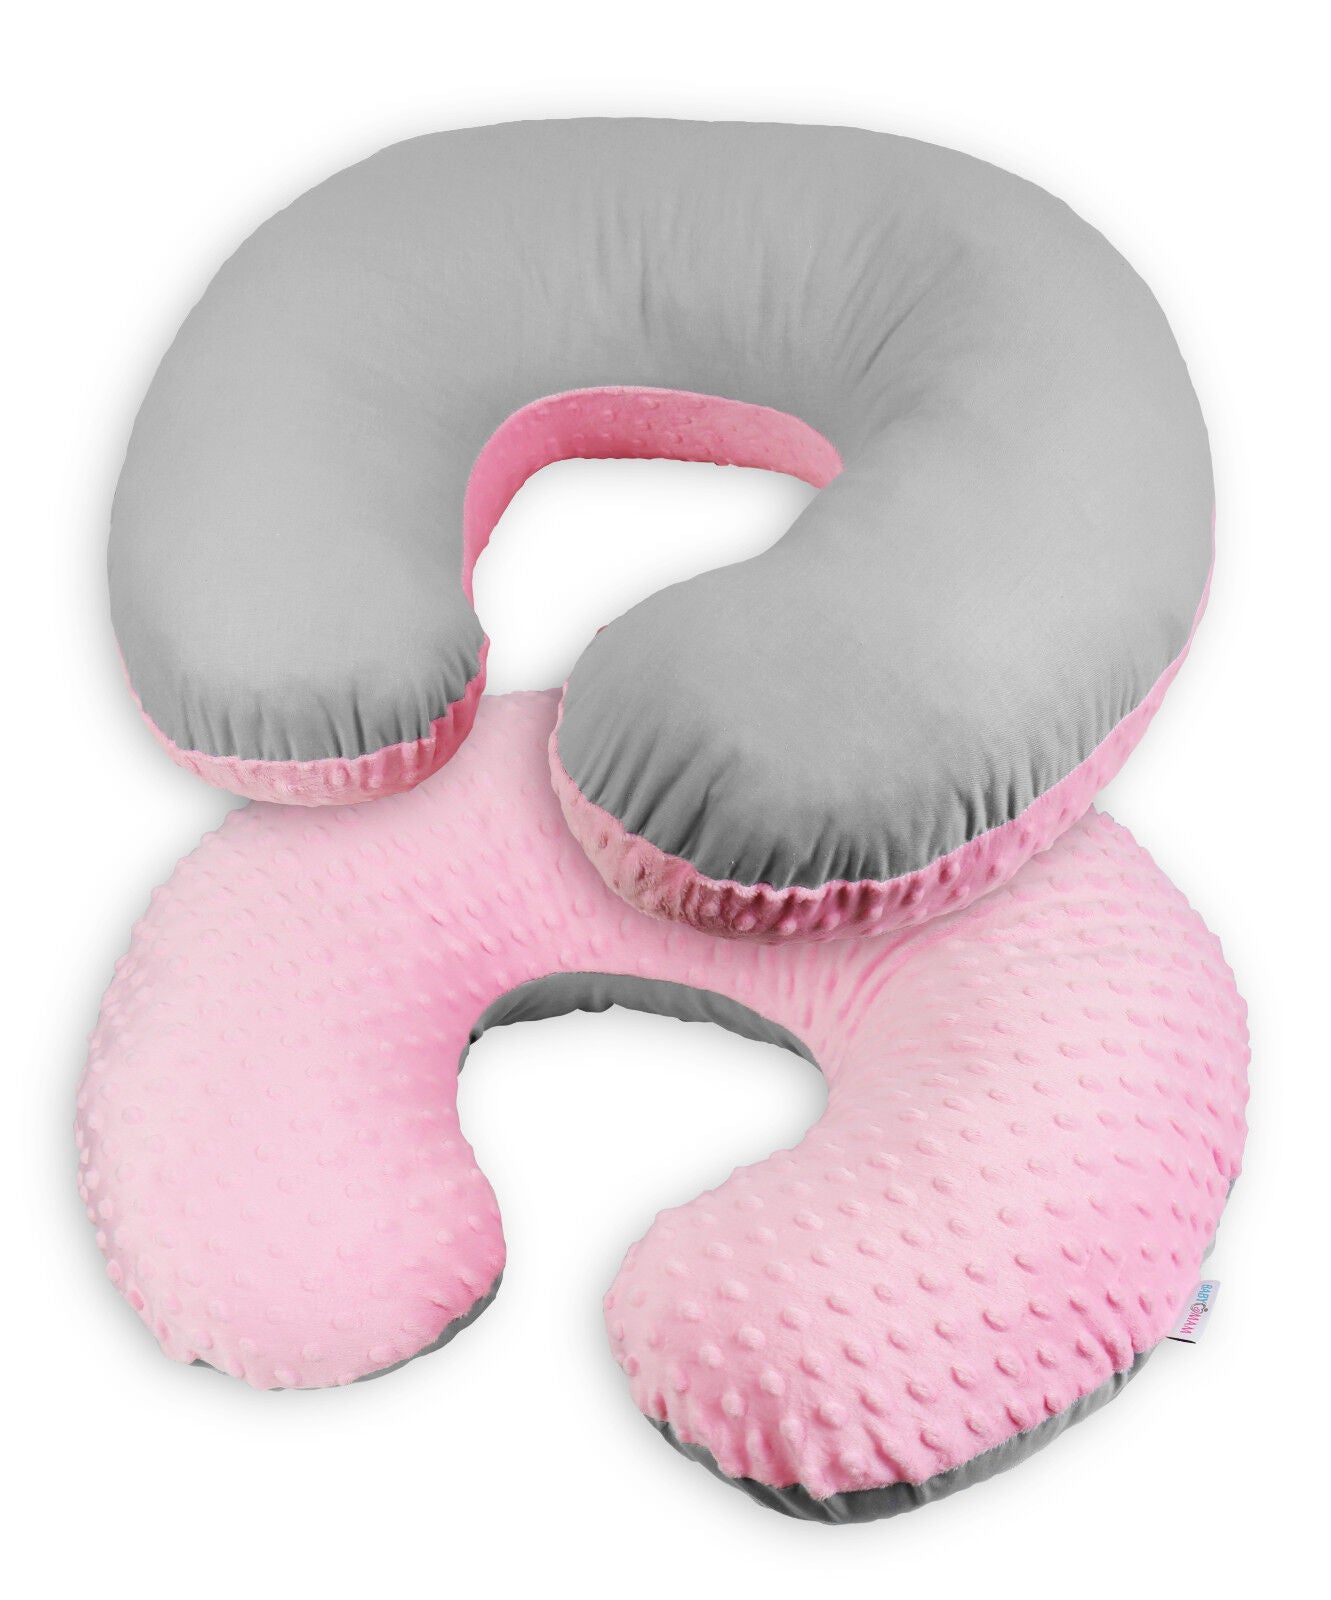 Baby Feeding Pillow Dimple Nursing Breastfeeding Pregnancy Pillow+Cover Pink